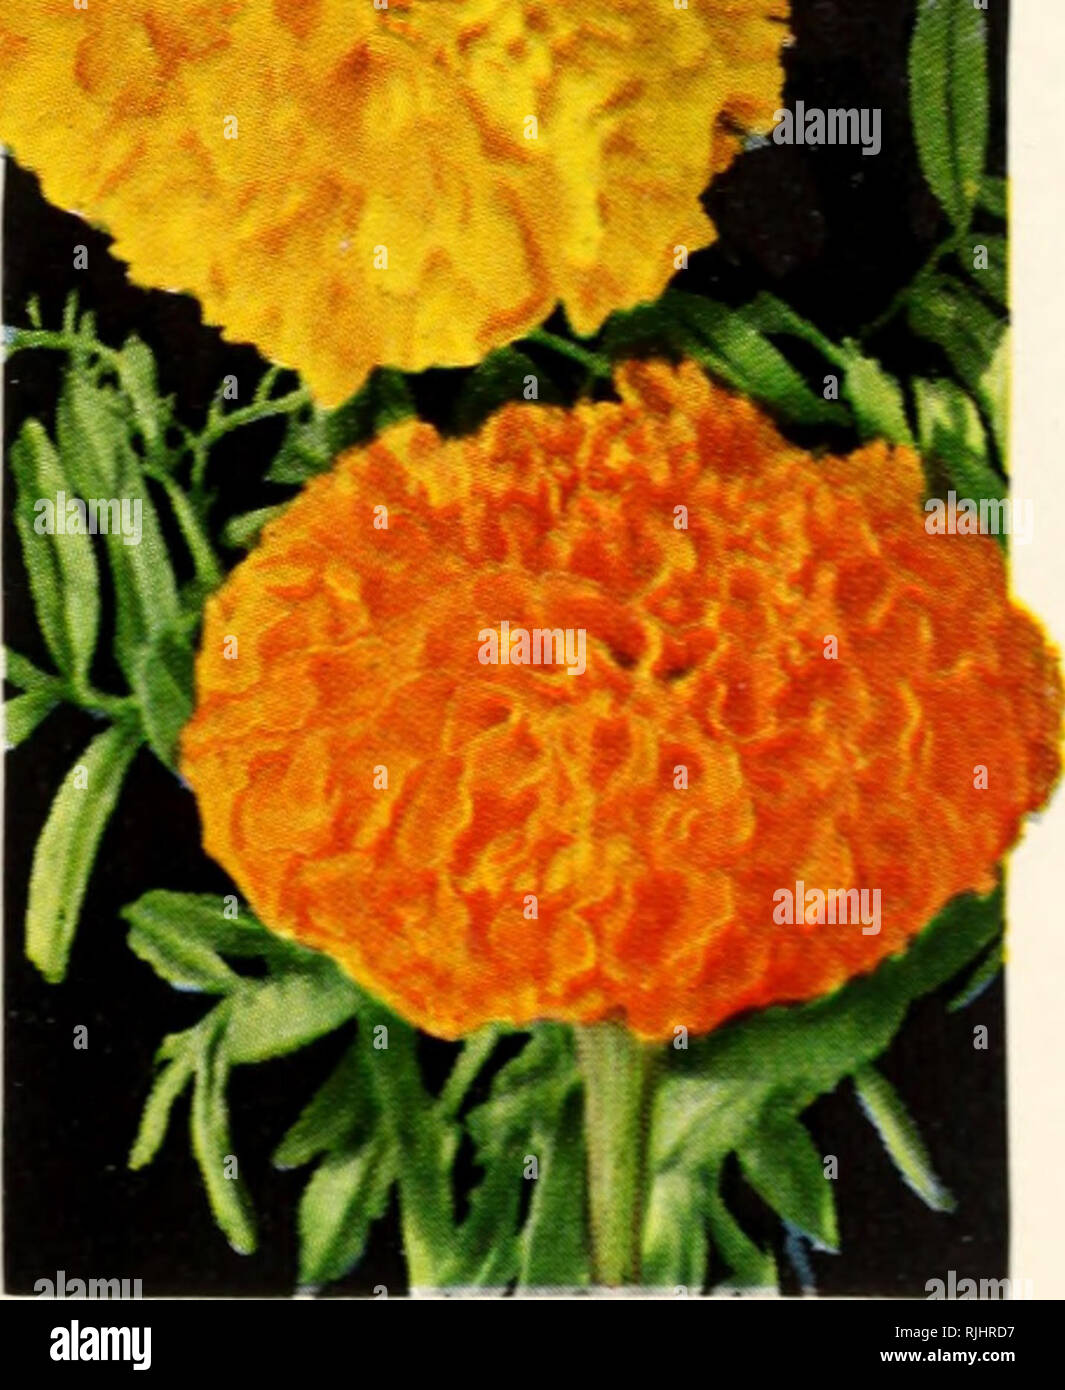 . Beckert seed &amp; bulb co. Nurseries (Horticulture) Pennsylvania Pittsburgh Catalogs; Nursery stock Pennsylvania Pittsburgh Catalogs; Flowers Seeds Pennsylvania Pittsburgh Catalogs; Bulbs (Plants) Pennsylvania Pittsburgh Catalogs; Gardening Pennsylvania Pittsburgh Equipment and supplies Catalogs. Marigold - Tagetes ah Sometime.-: calleiA â (I'andelabra Plants&quot; due to th- i: shape. Easy to grow in any soil and blooming freely from July until frost. Marigolds are one of the most satisfactory flowers to grow. DOUBLE APRICAN. Large, globular flowers on long .st-rms. 2151 Eldorado. Orange-v Stock Photo